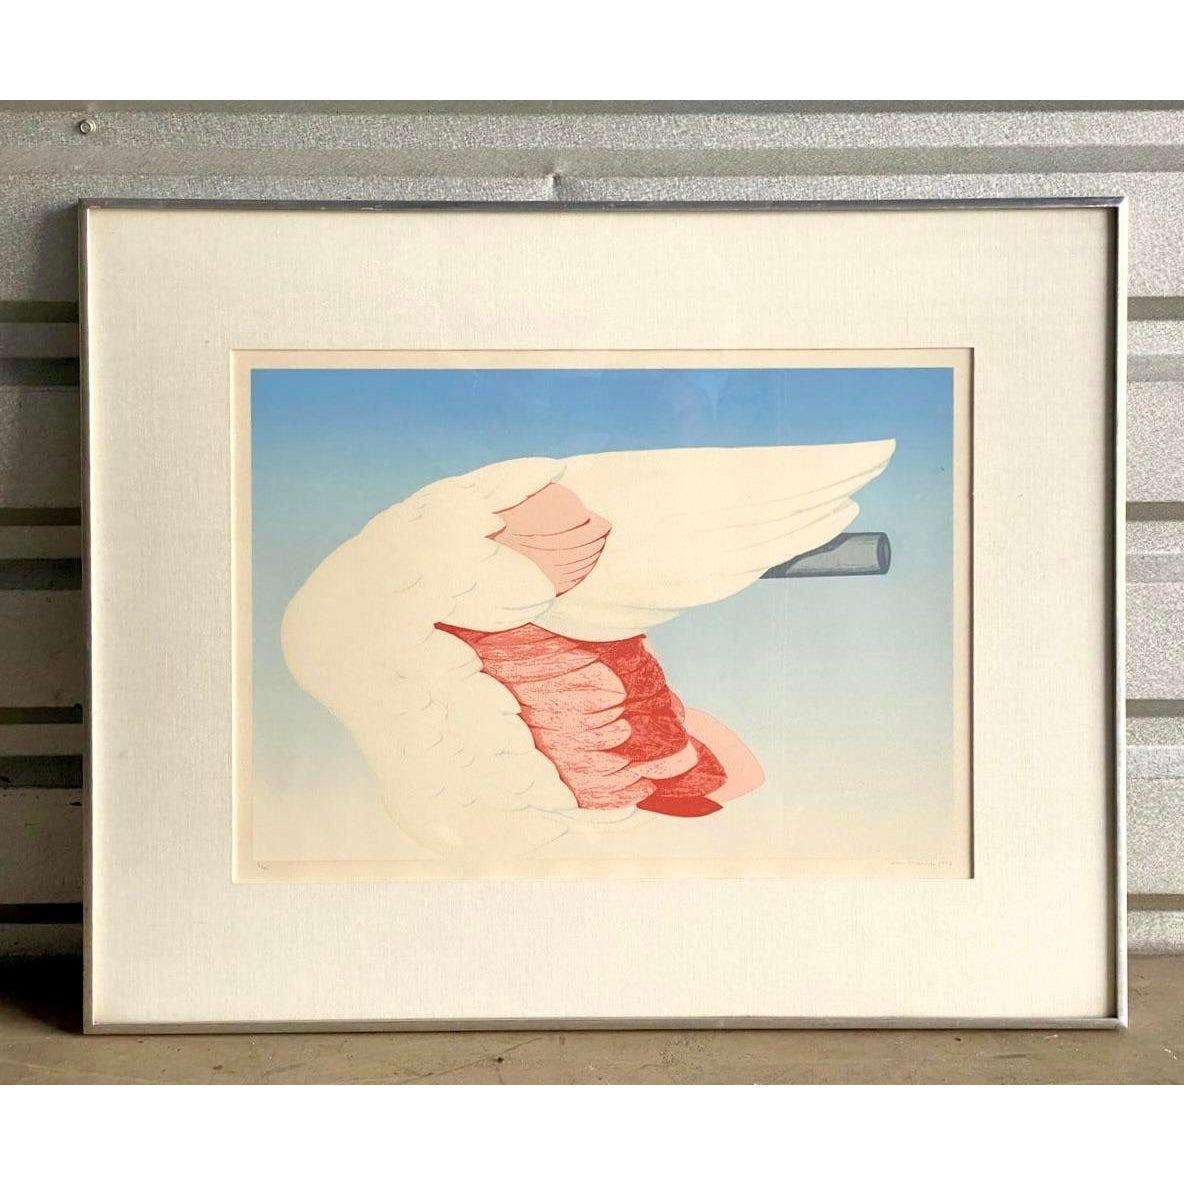 Late 20th Century Vintage Boho Signed Original 1972 Lithograph of Flamingo Wing For Sale